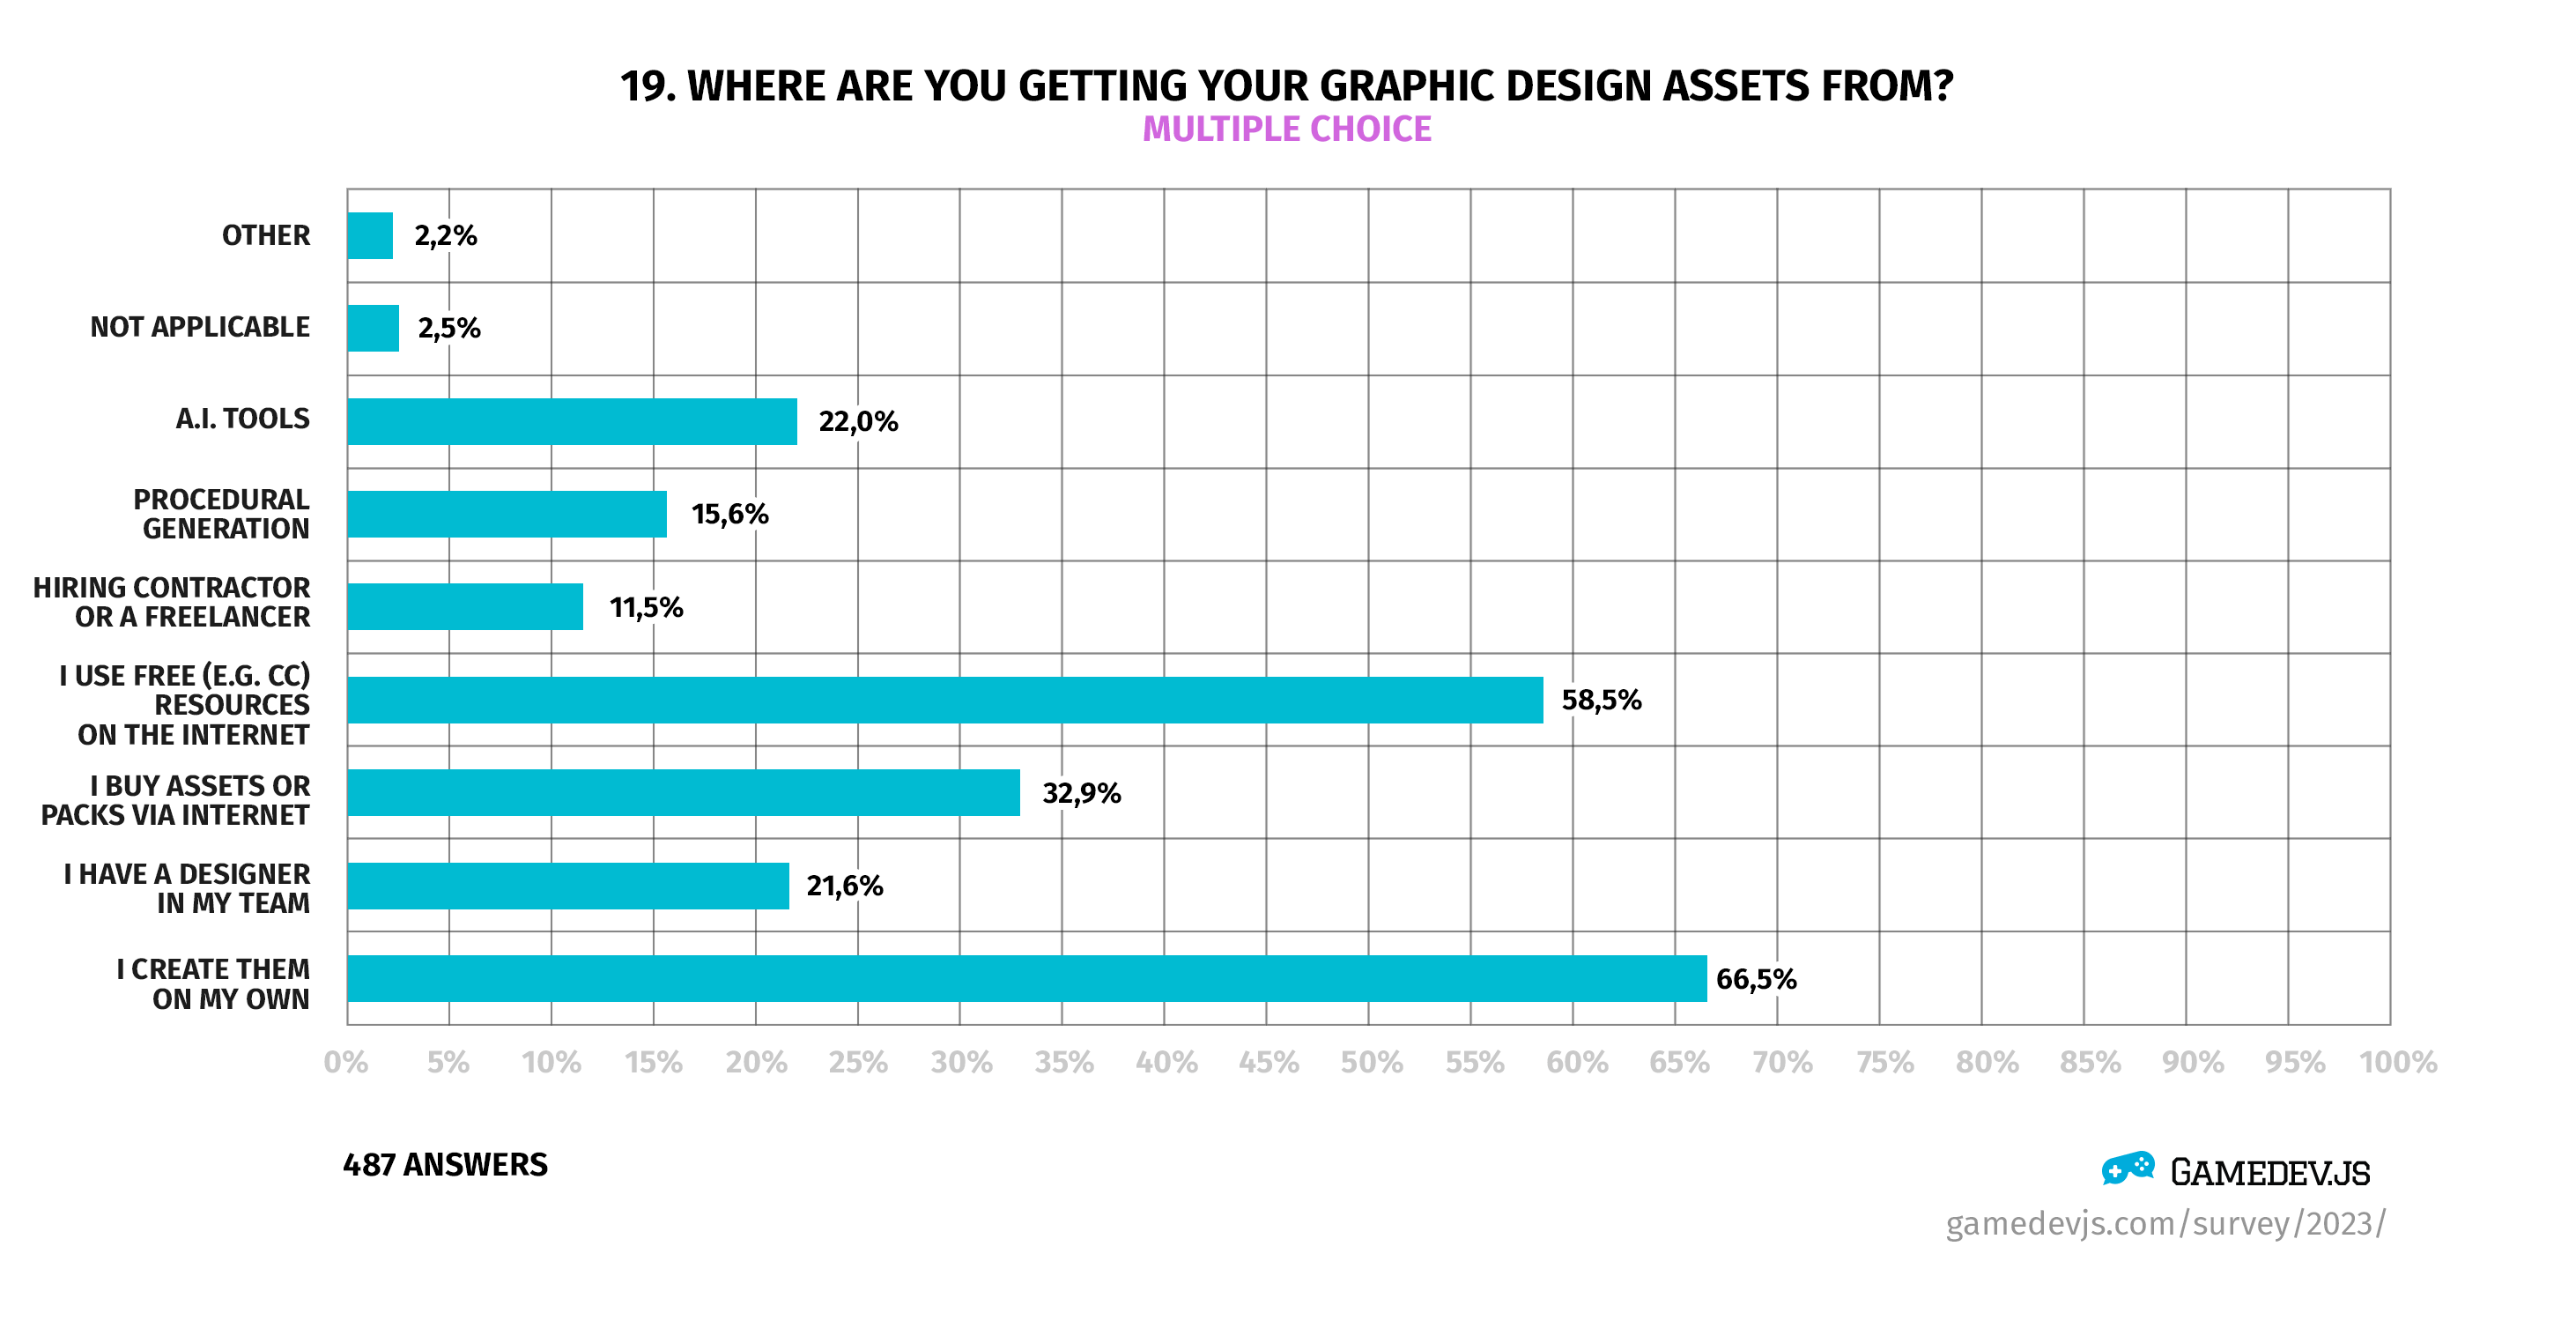 Gamedev.js Survey 2023 - Question #19: Where are you getting your graphic design assets from?